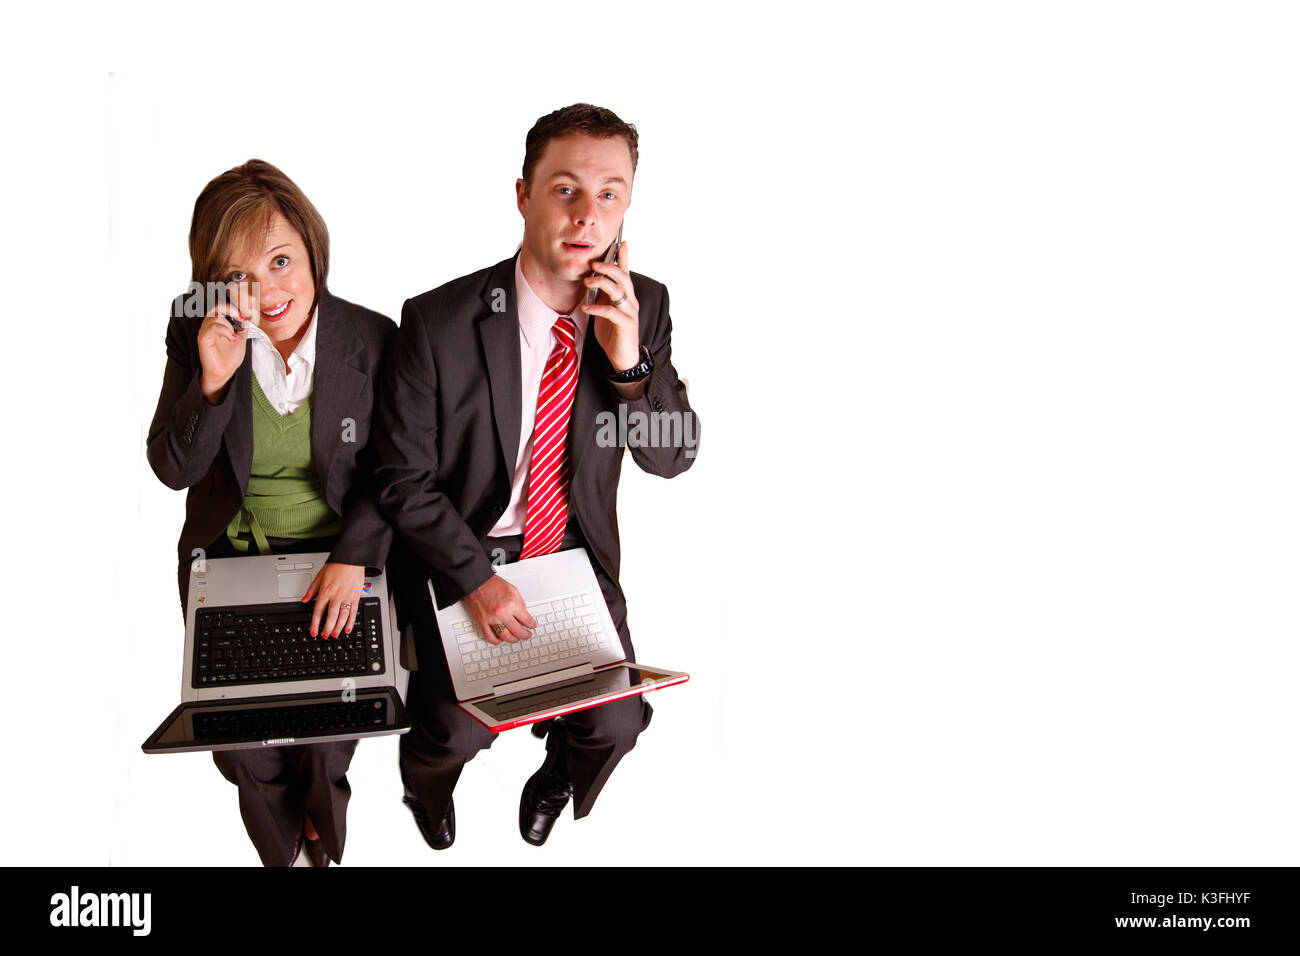 a business man and woman sit working on laptops and cellphones Stock Photo